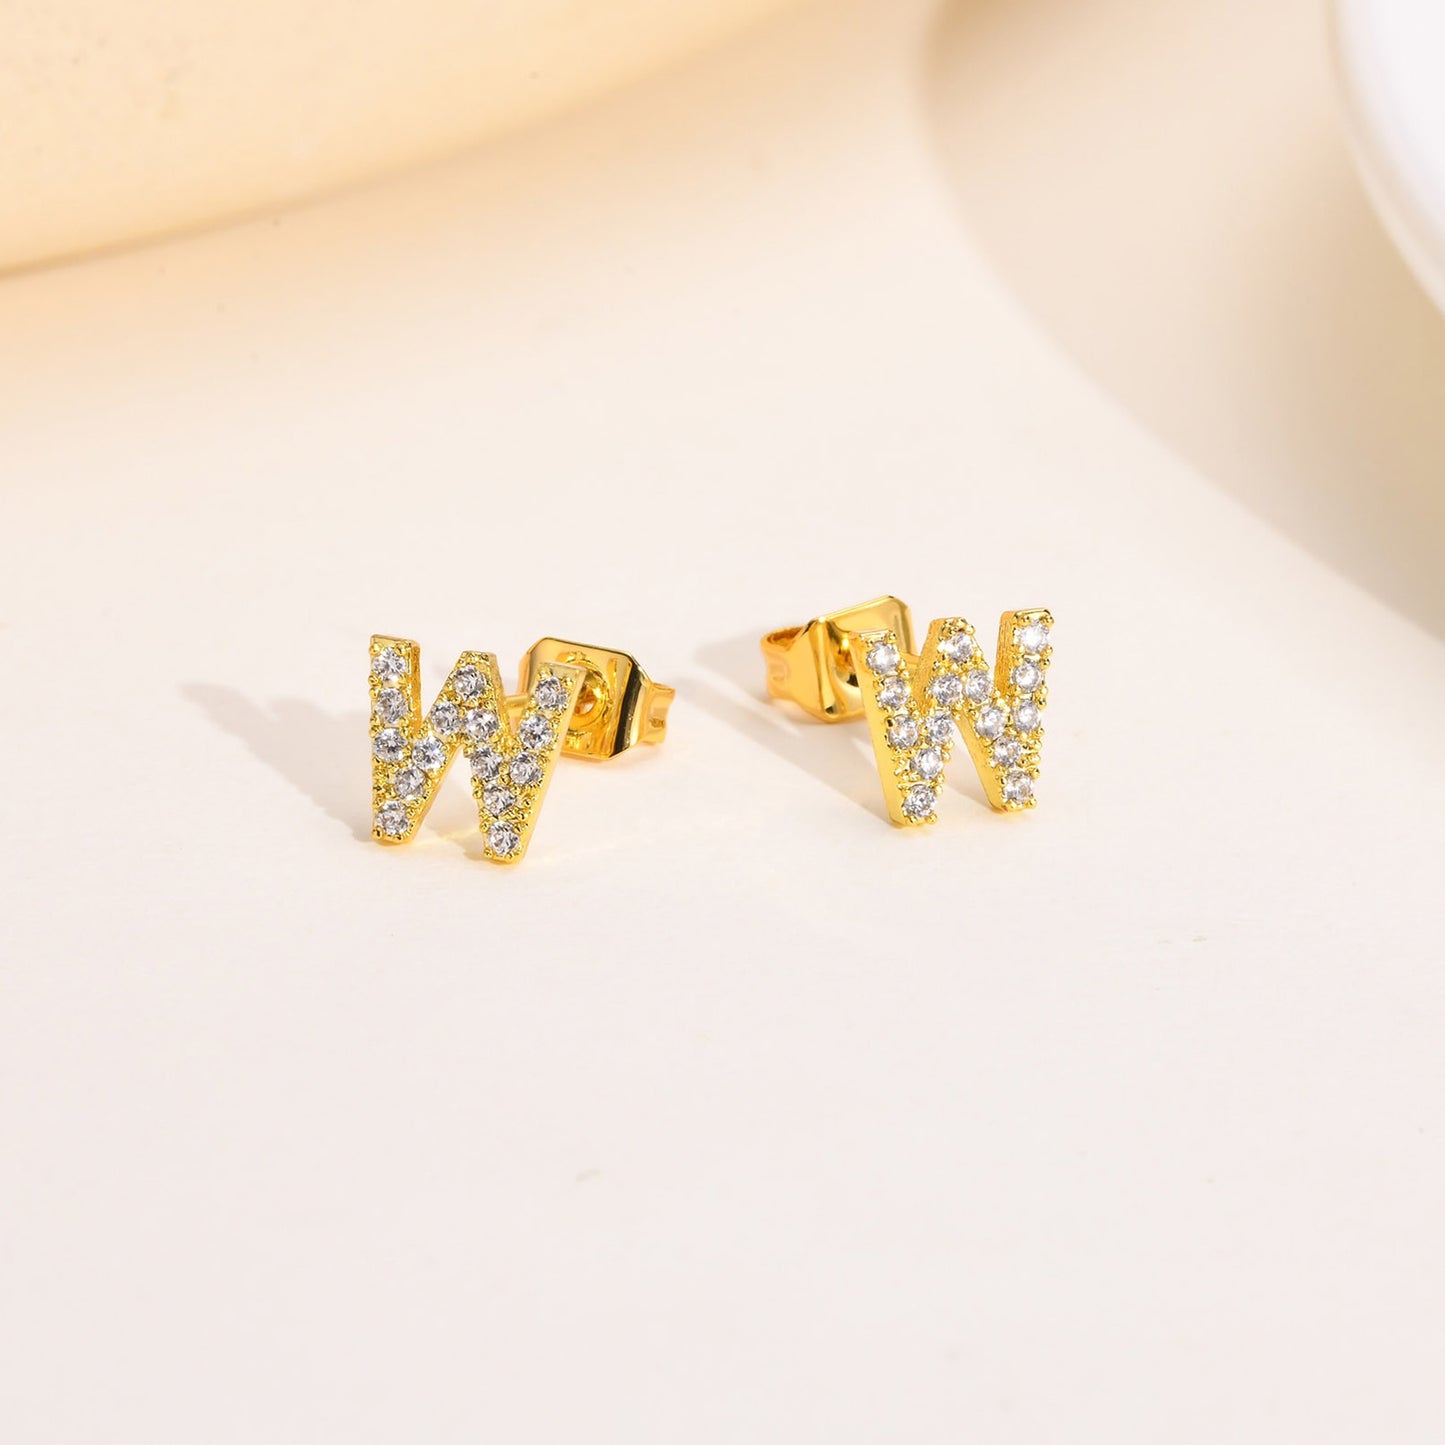 Aretes para mujeres Delicate Bling 26 A-Z Initial Letter Stud Earrings for Women Girls, Small Gold Color Alphabet Name Earring Piercing Jewelry